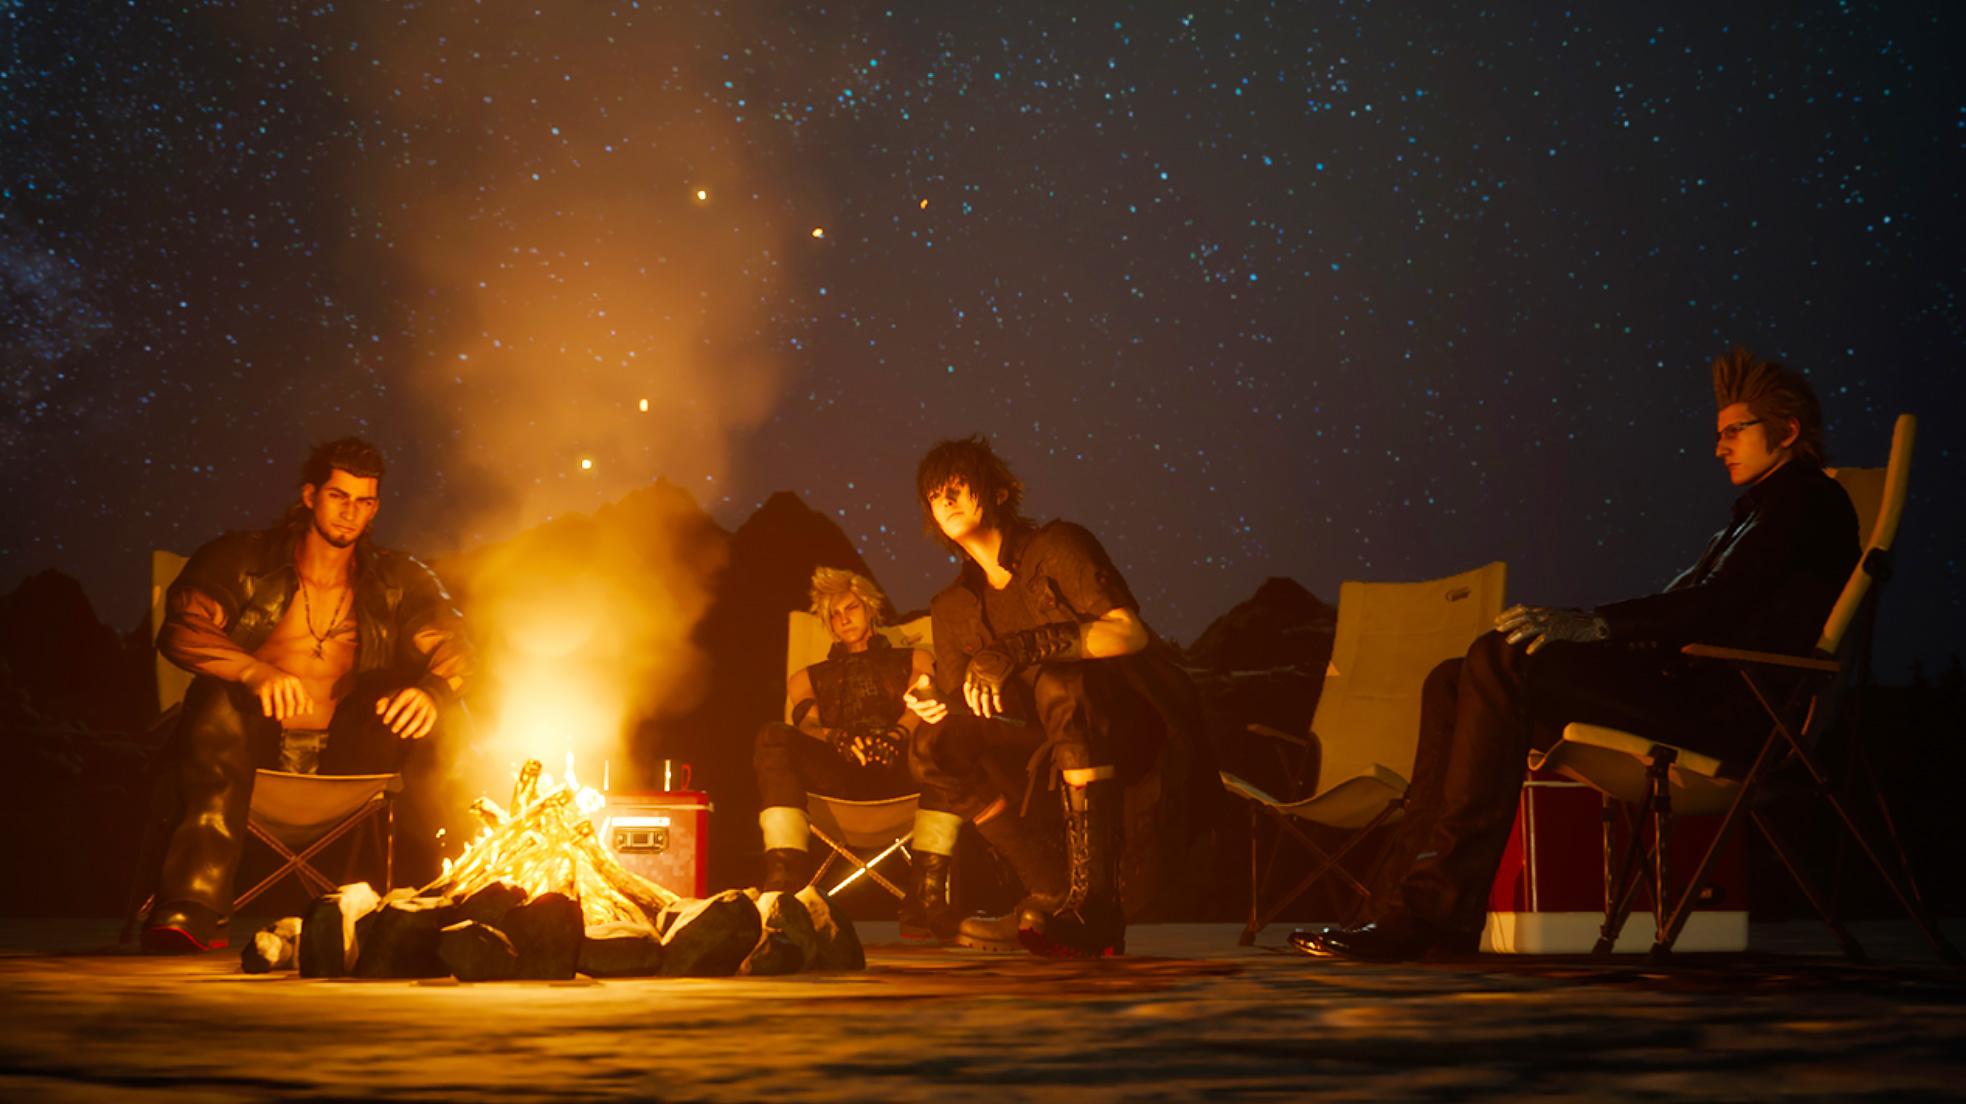 final fantasy 15 characters around a campfire